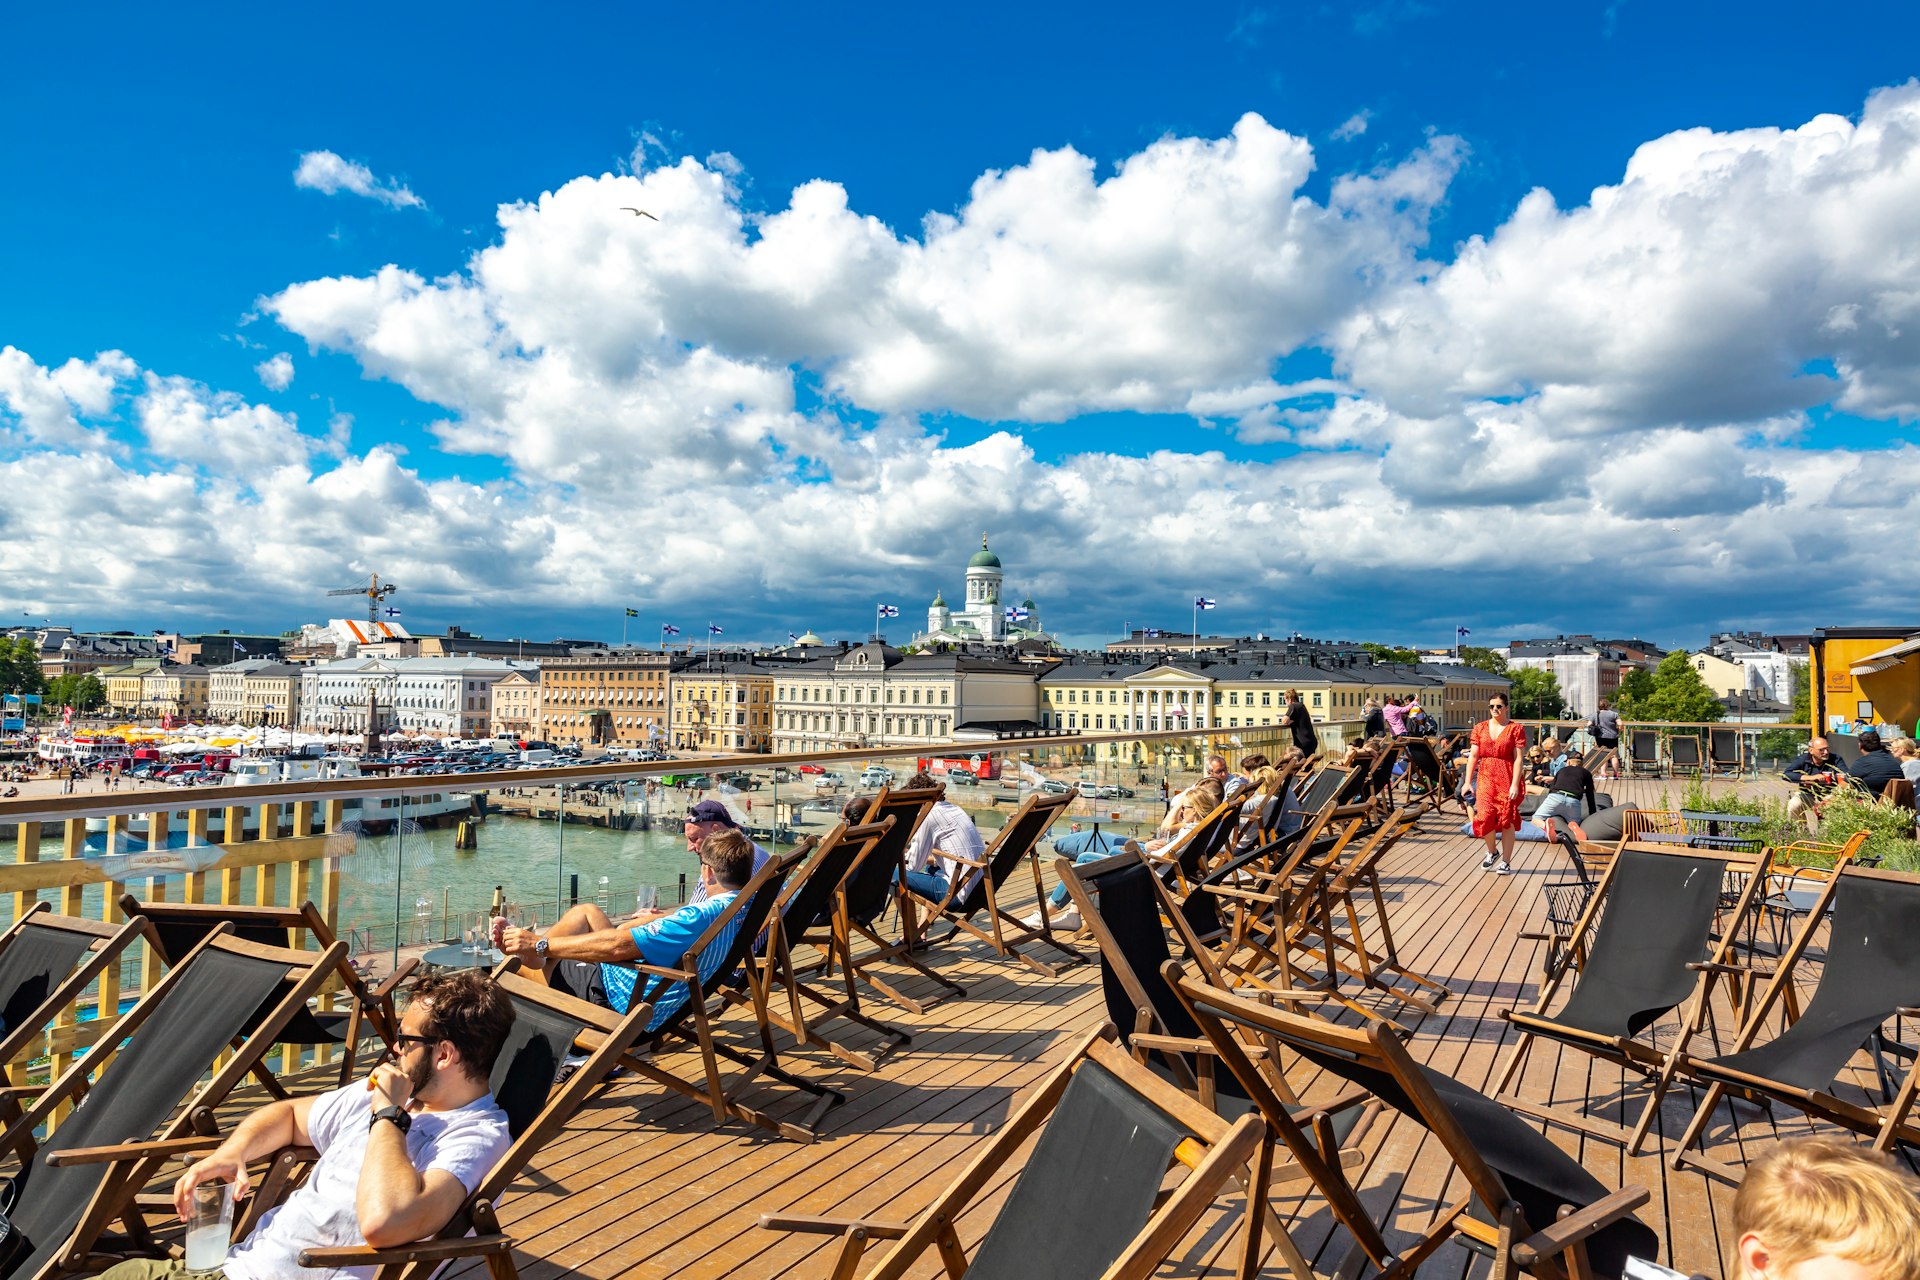 People lounge in the sun on some decking by the water in Helsinki